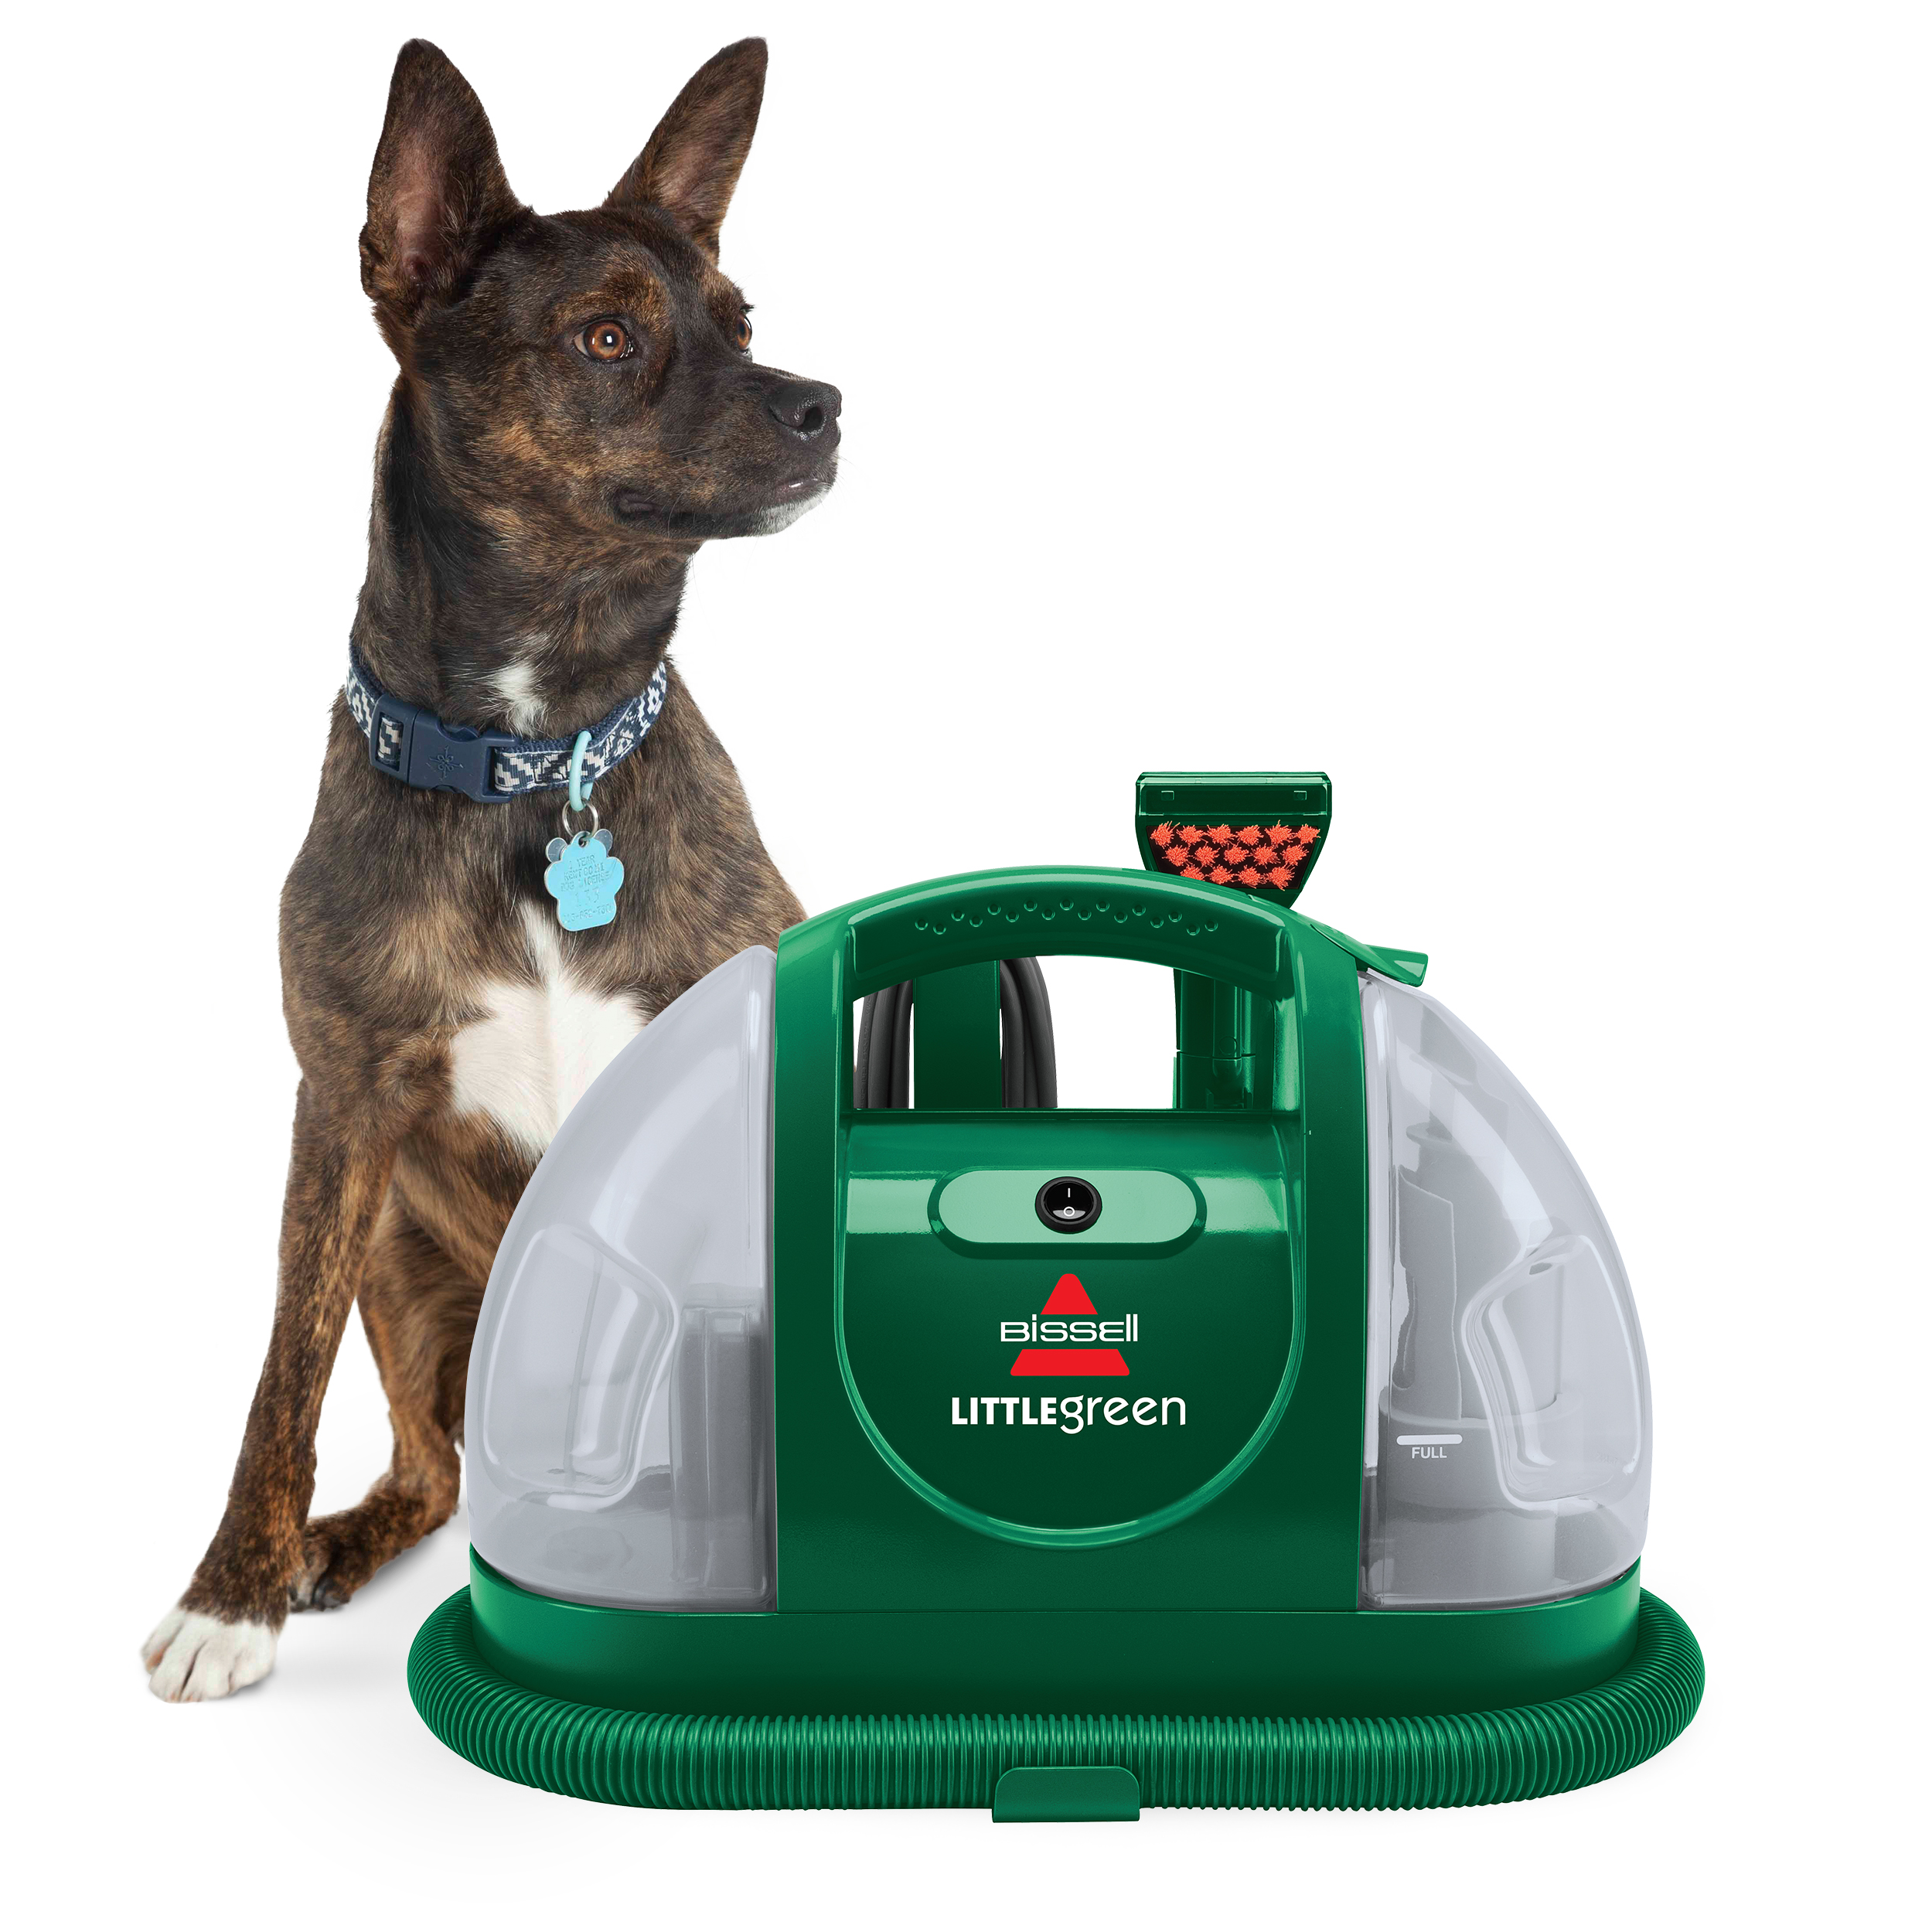 Bissell 1400M Little Green Portable Spot and Stain Cleaner $79 + Free Shipping